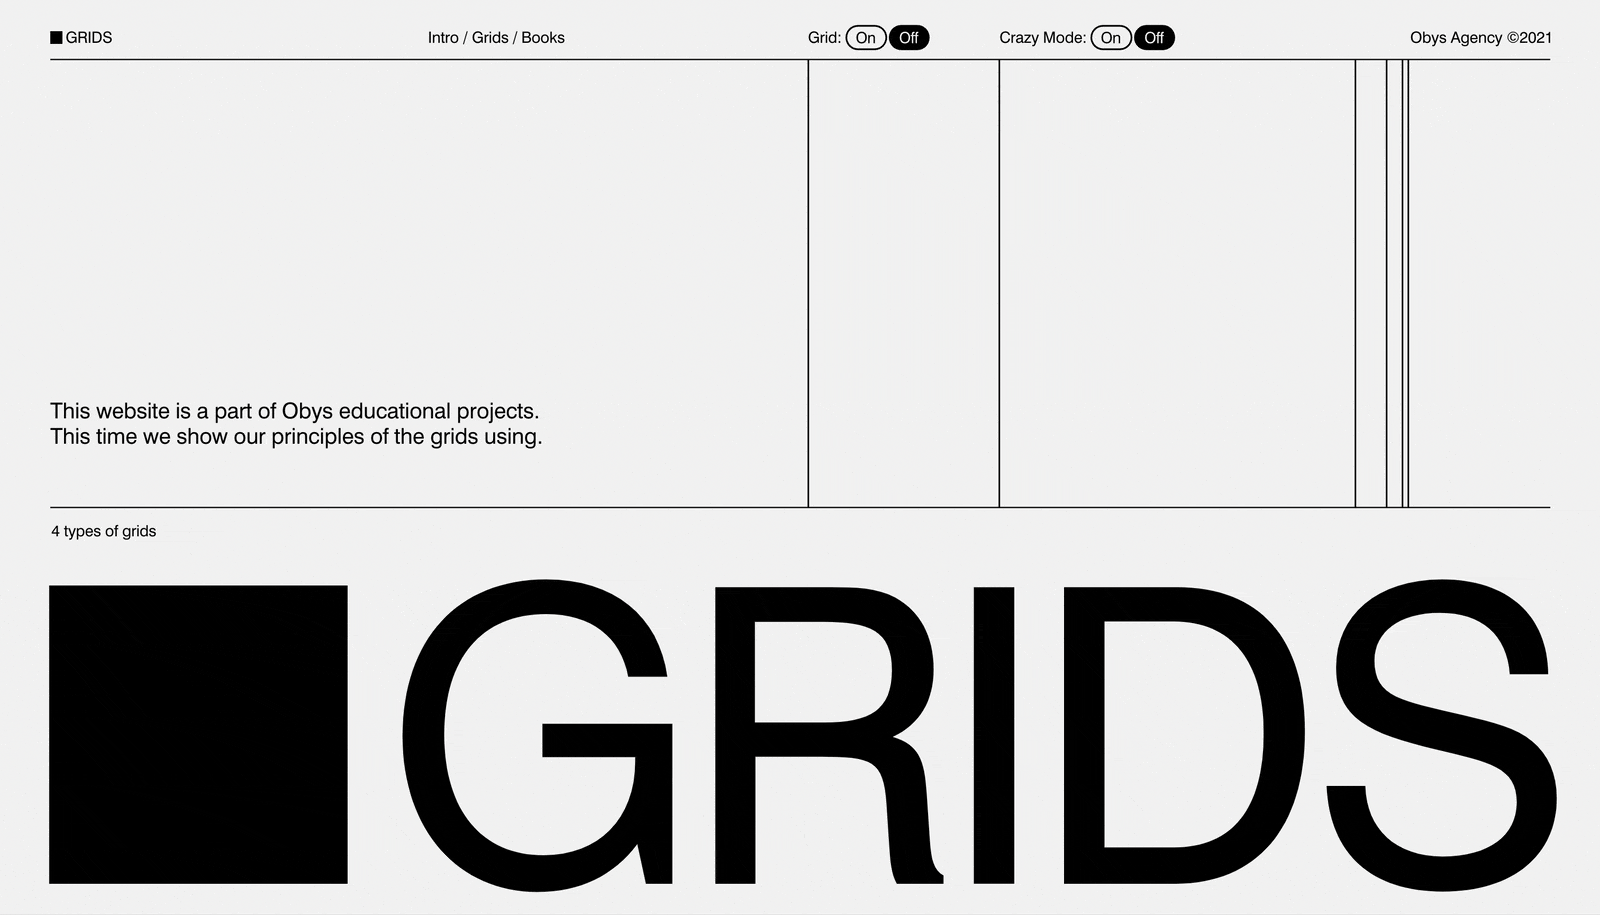 readymag blog_grids project by obys agency